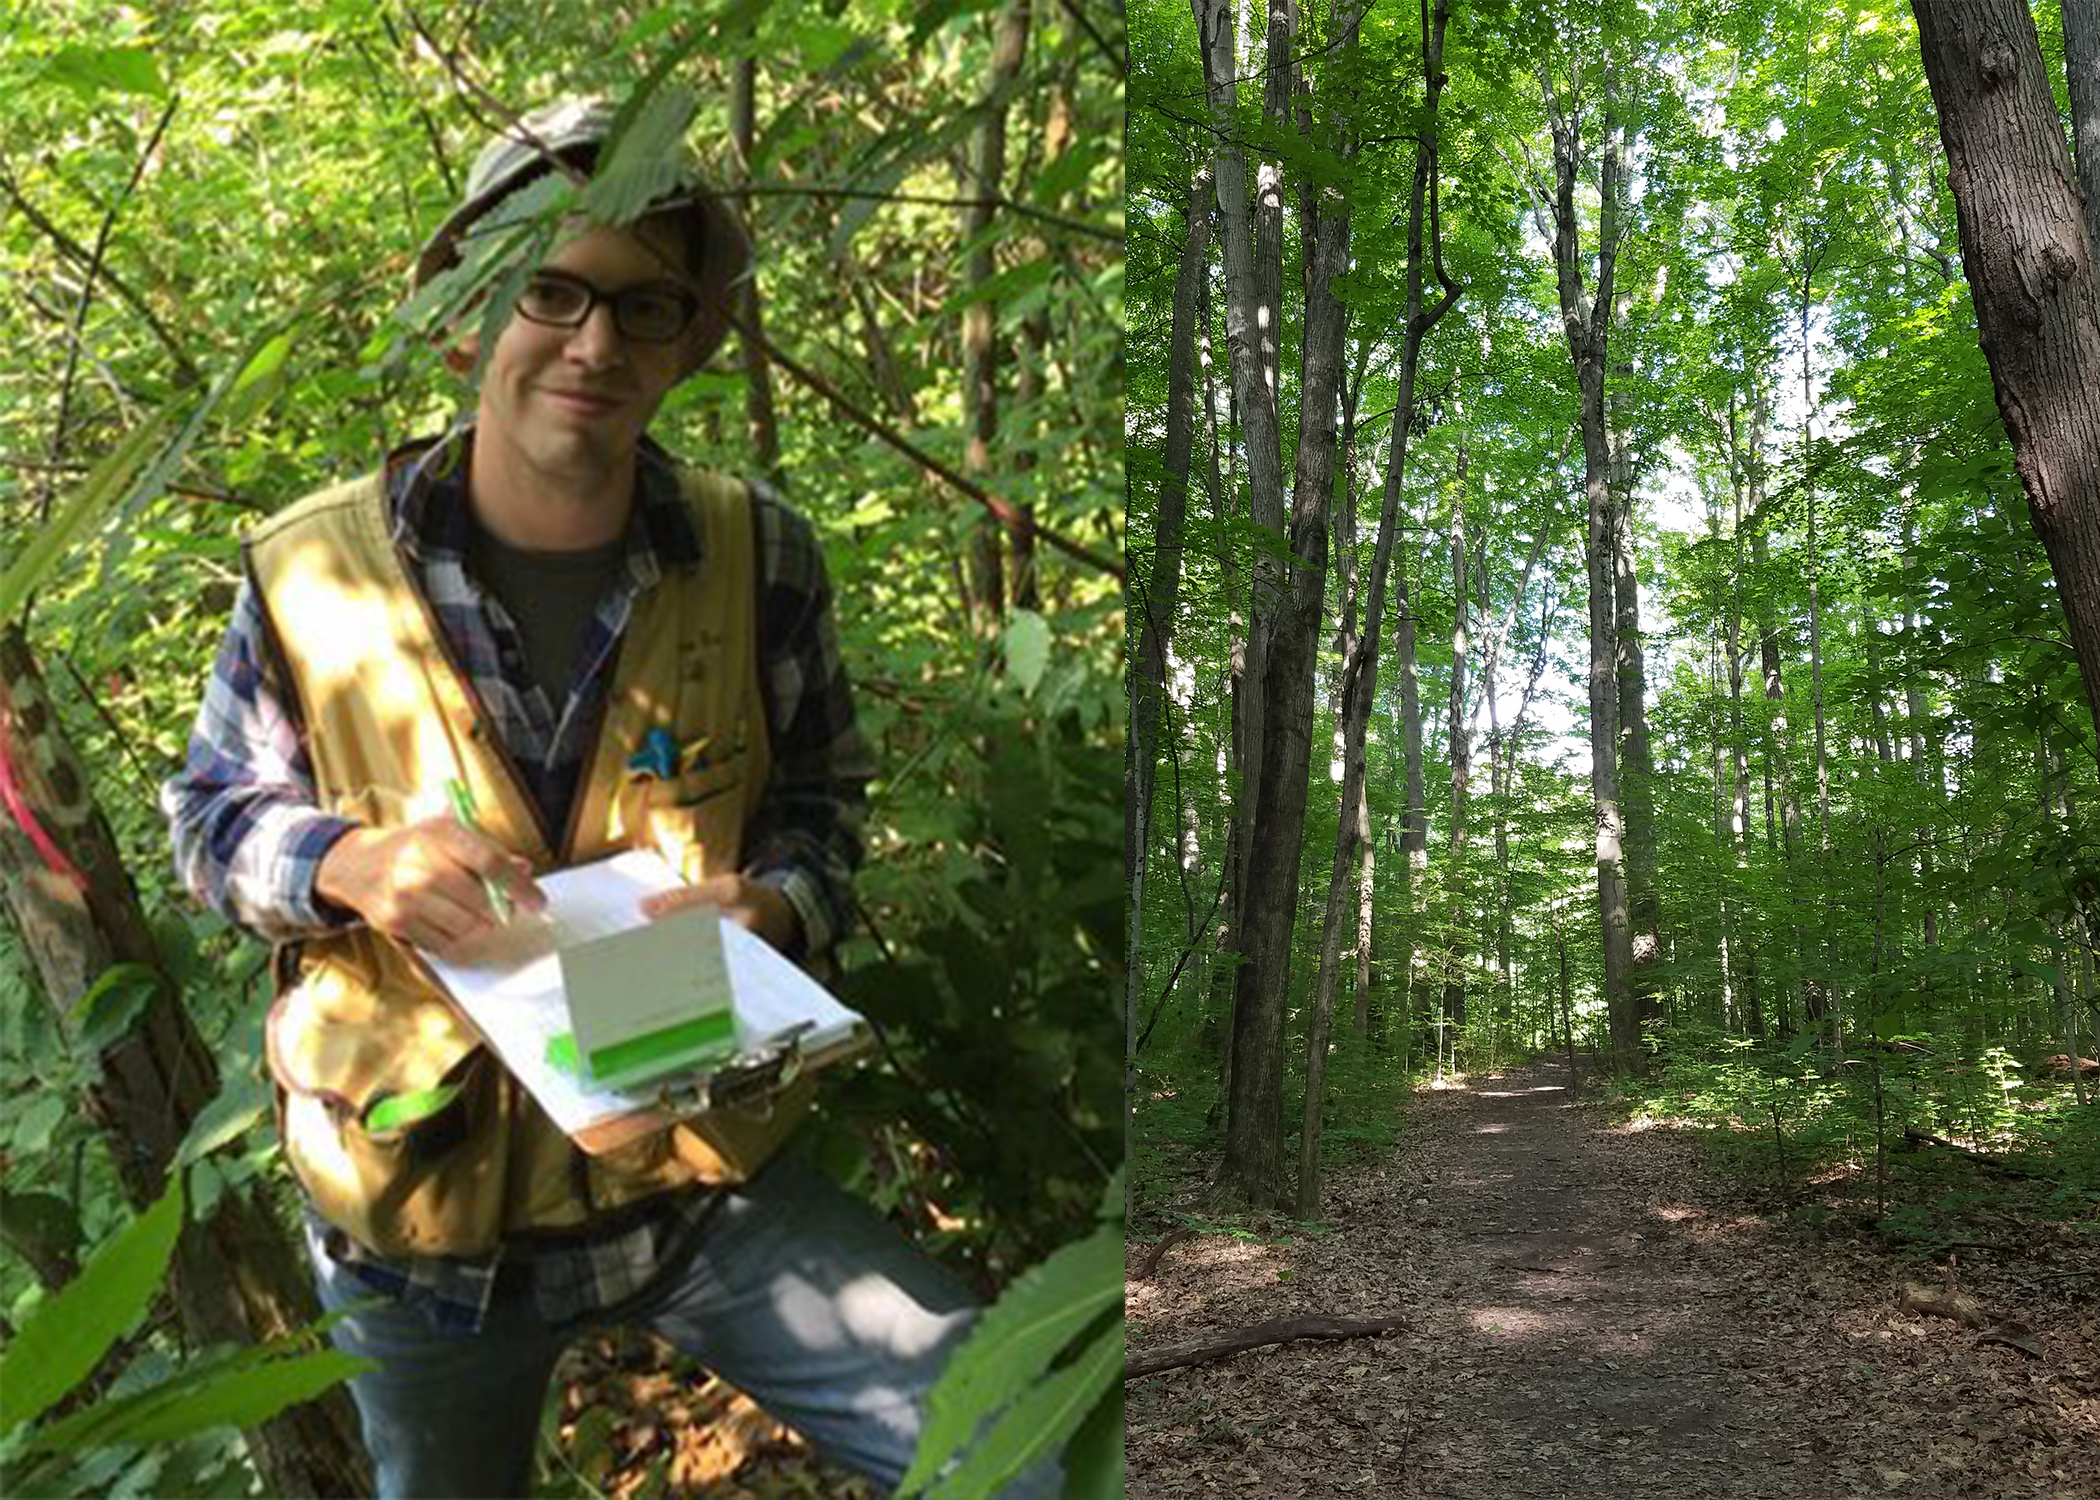 Left: man in woods. Right: open woods with path